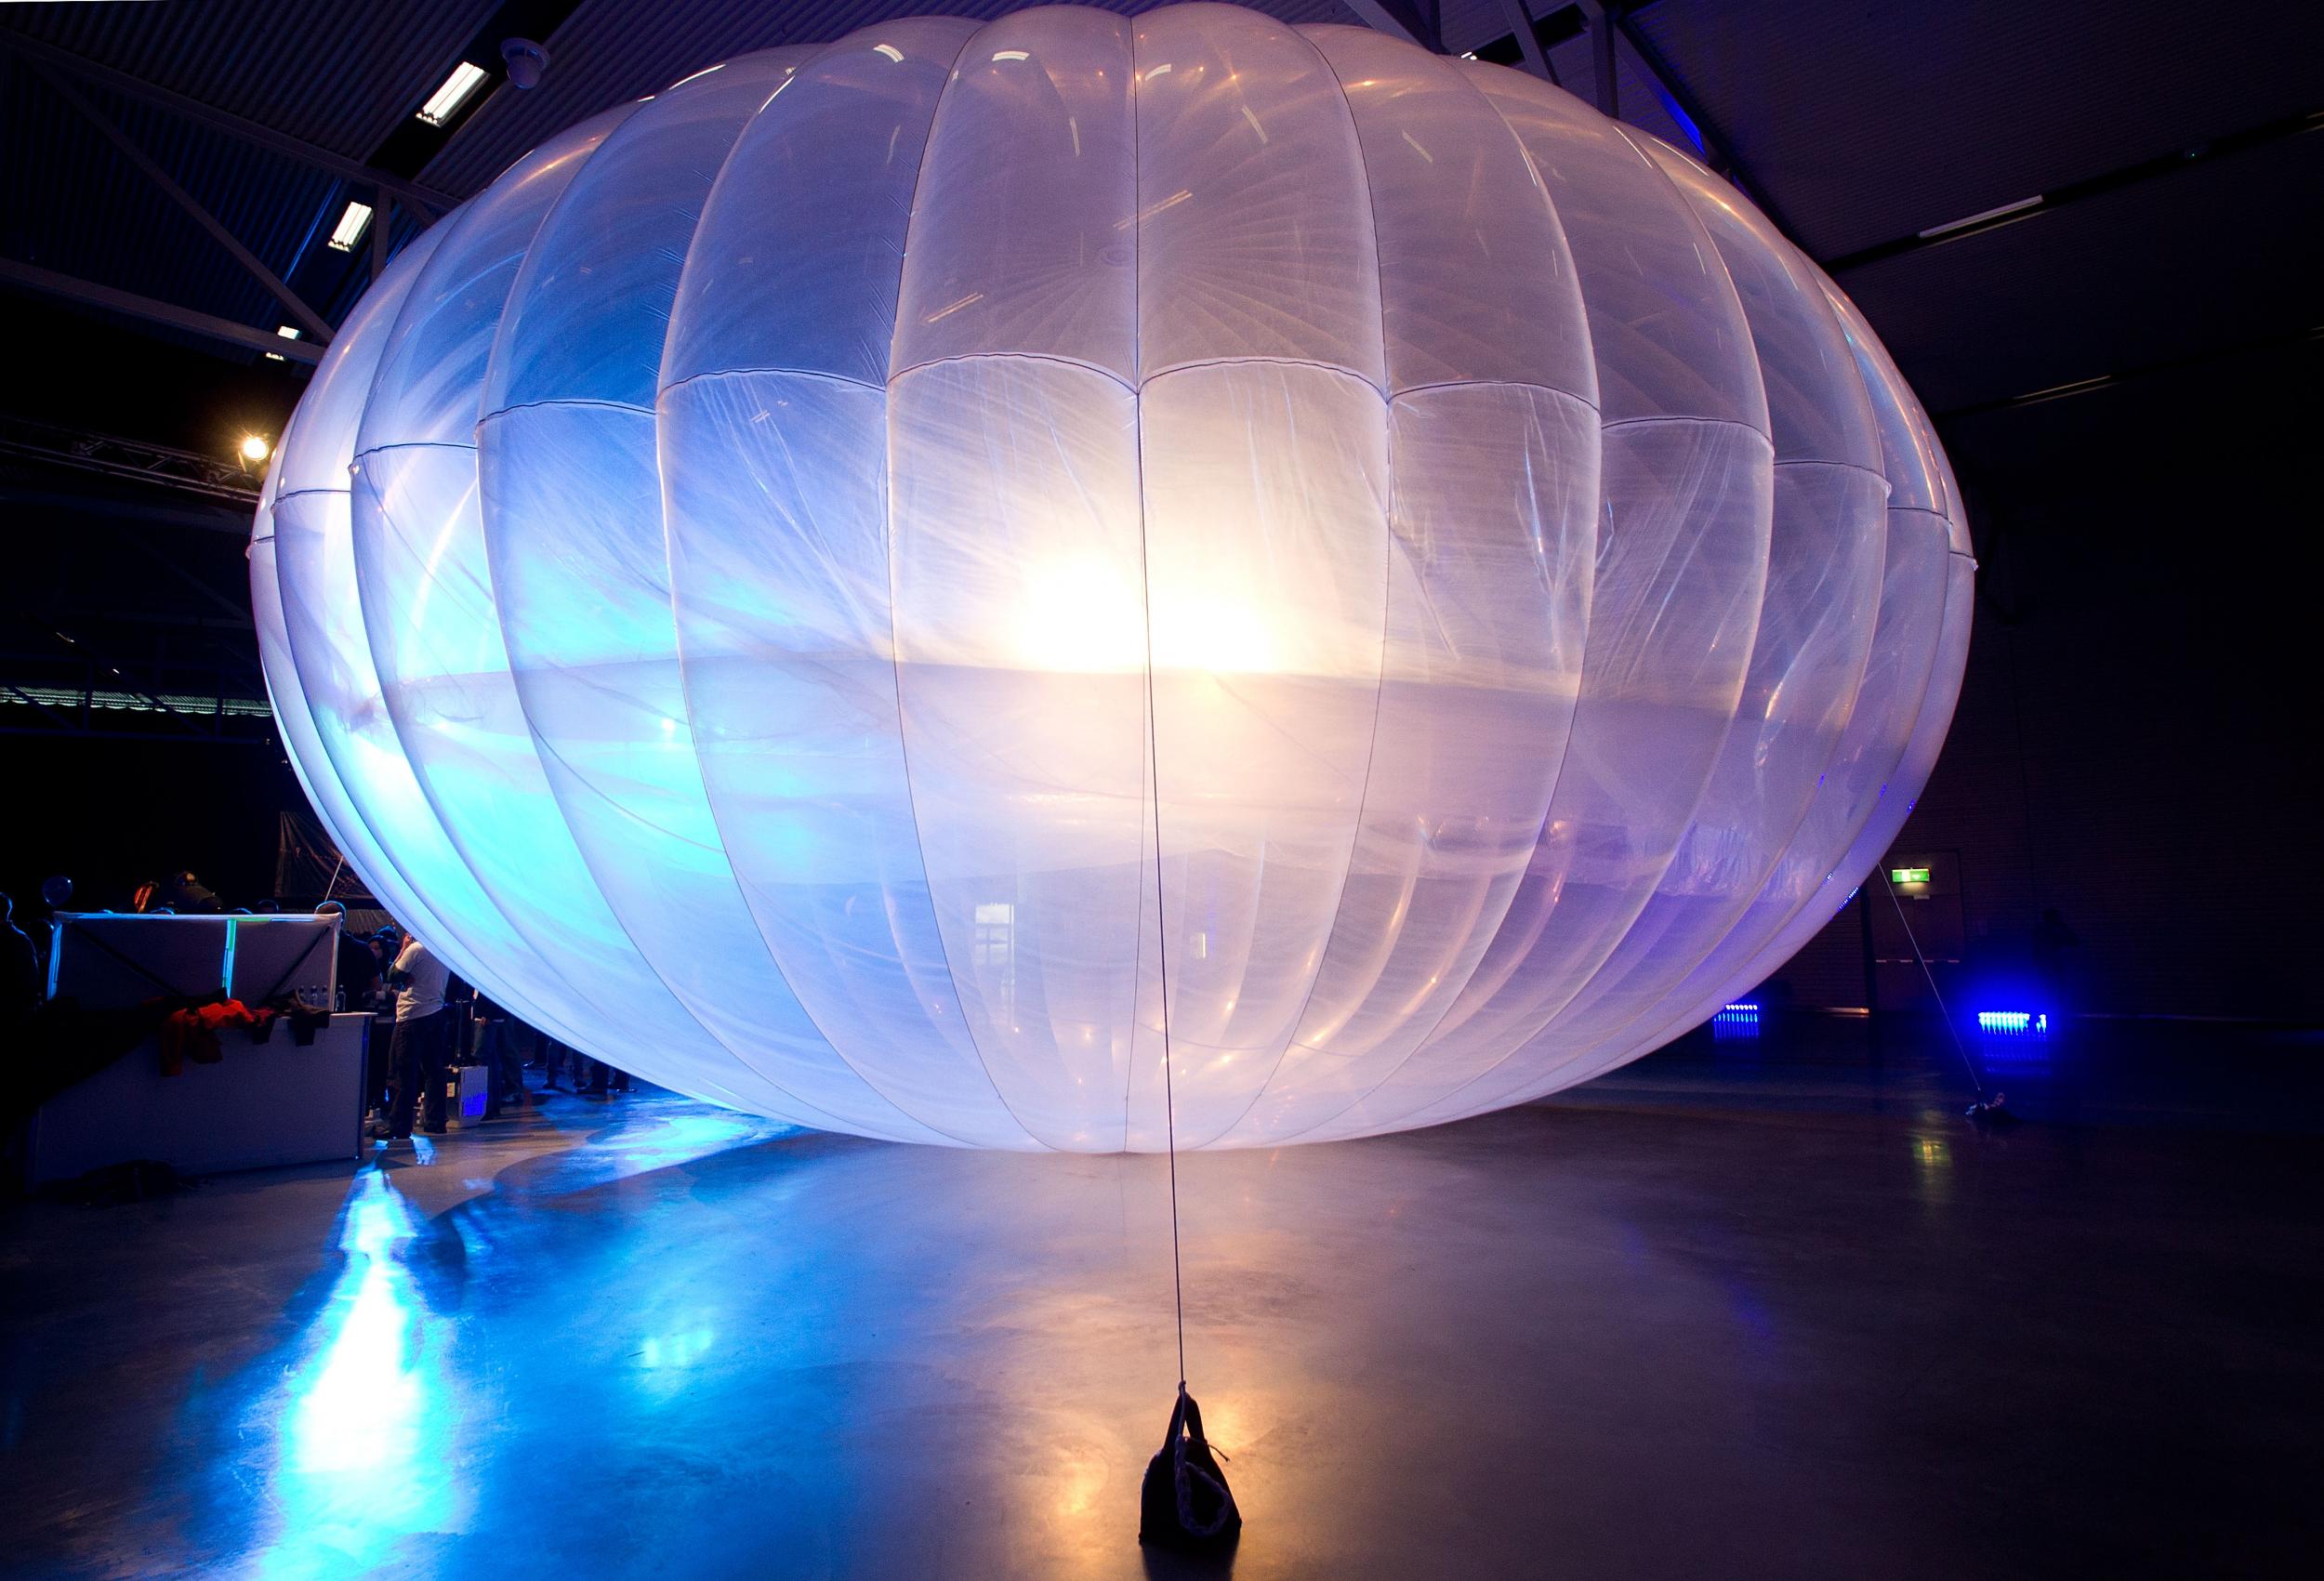 A Google Project Loon balloon is displayed at the Air Force Museum in Christchurch, New Zealand